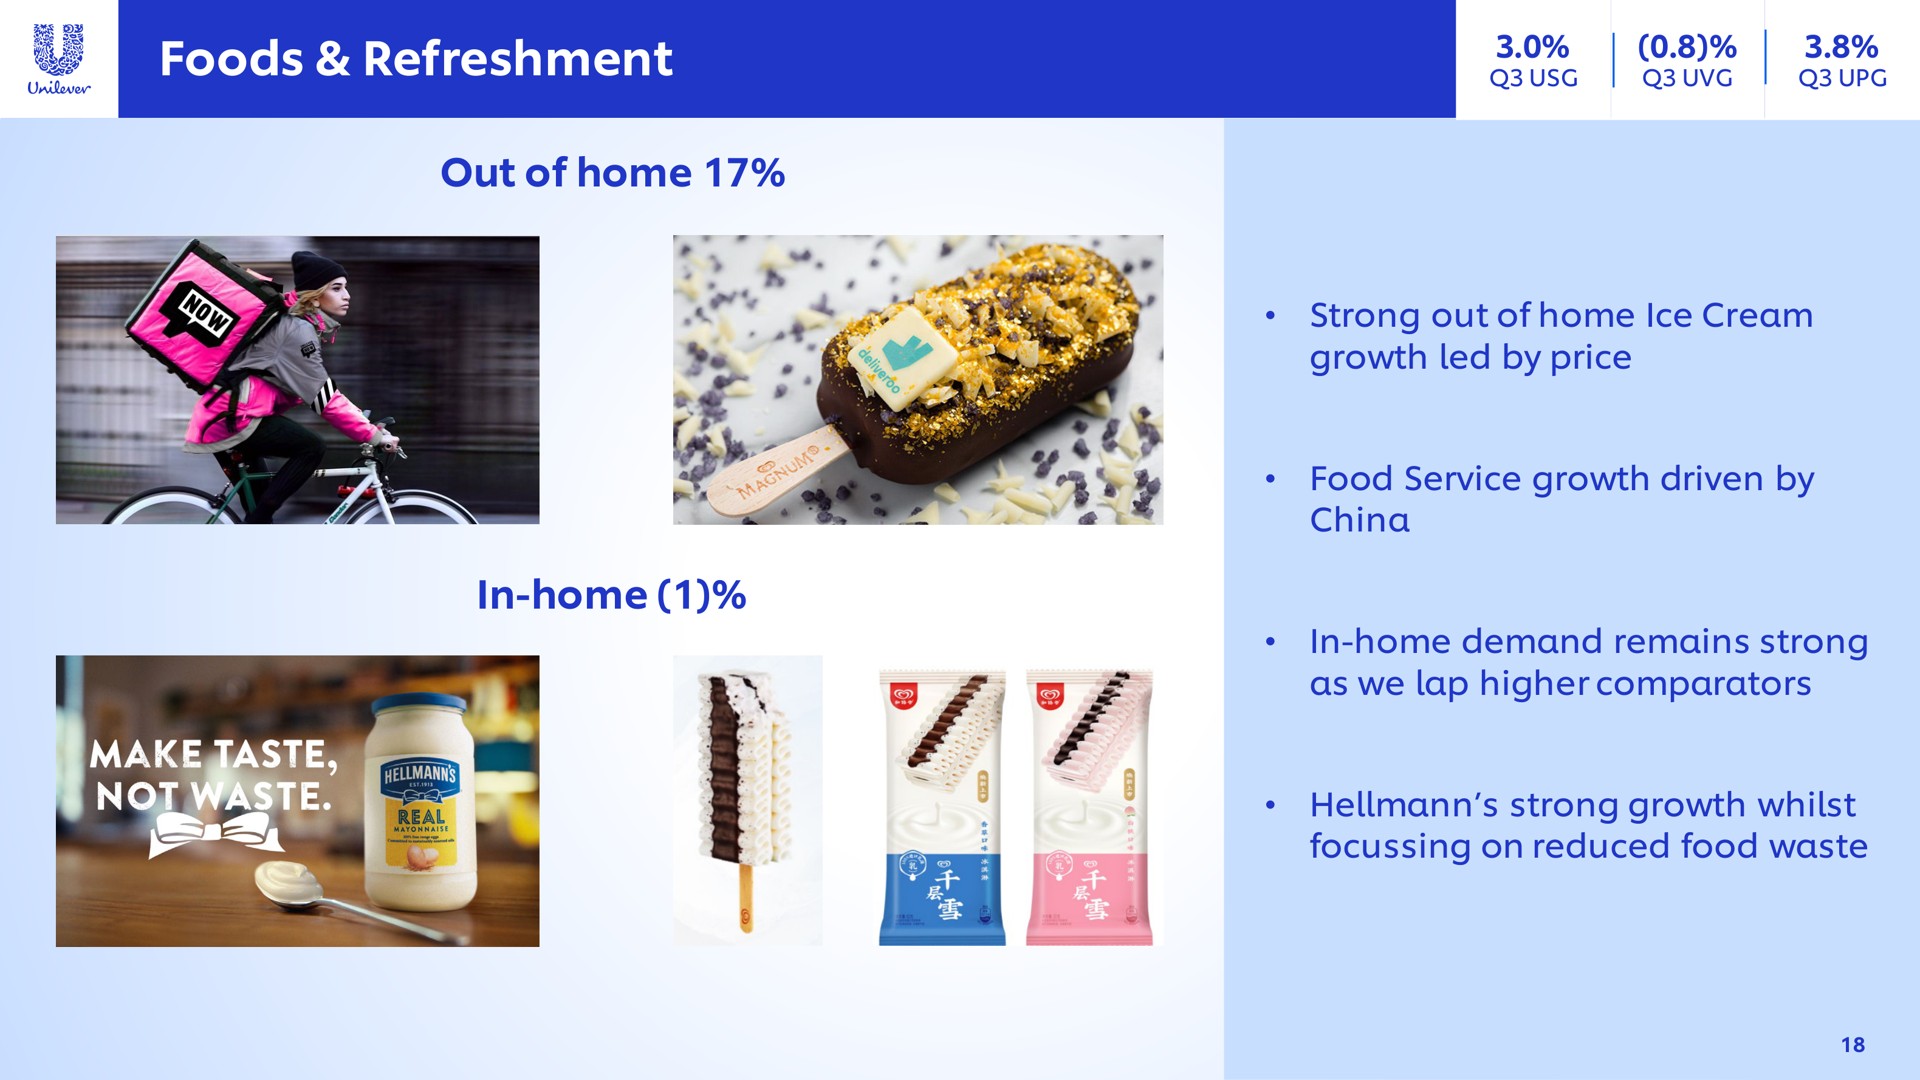 foods refreshment out of home in home growth led by price food service growth driven by demand remains strong as we lap higher strong growth whilst focussing on reduced food waste | Unilever